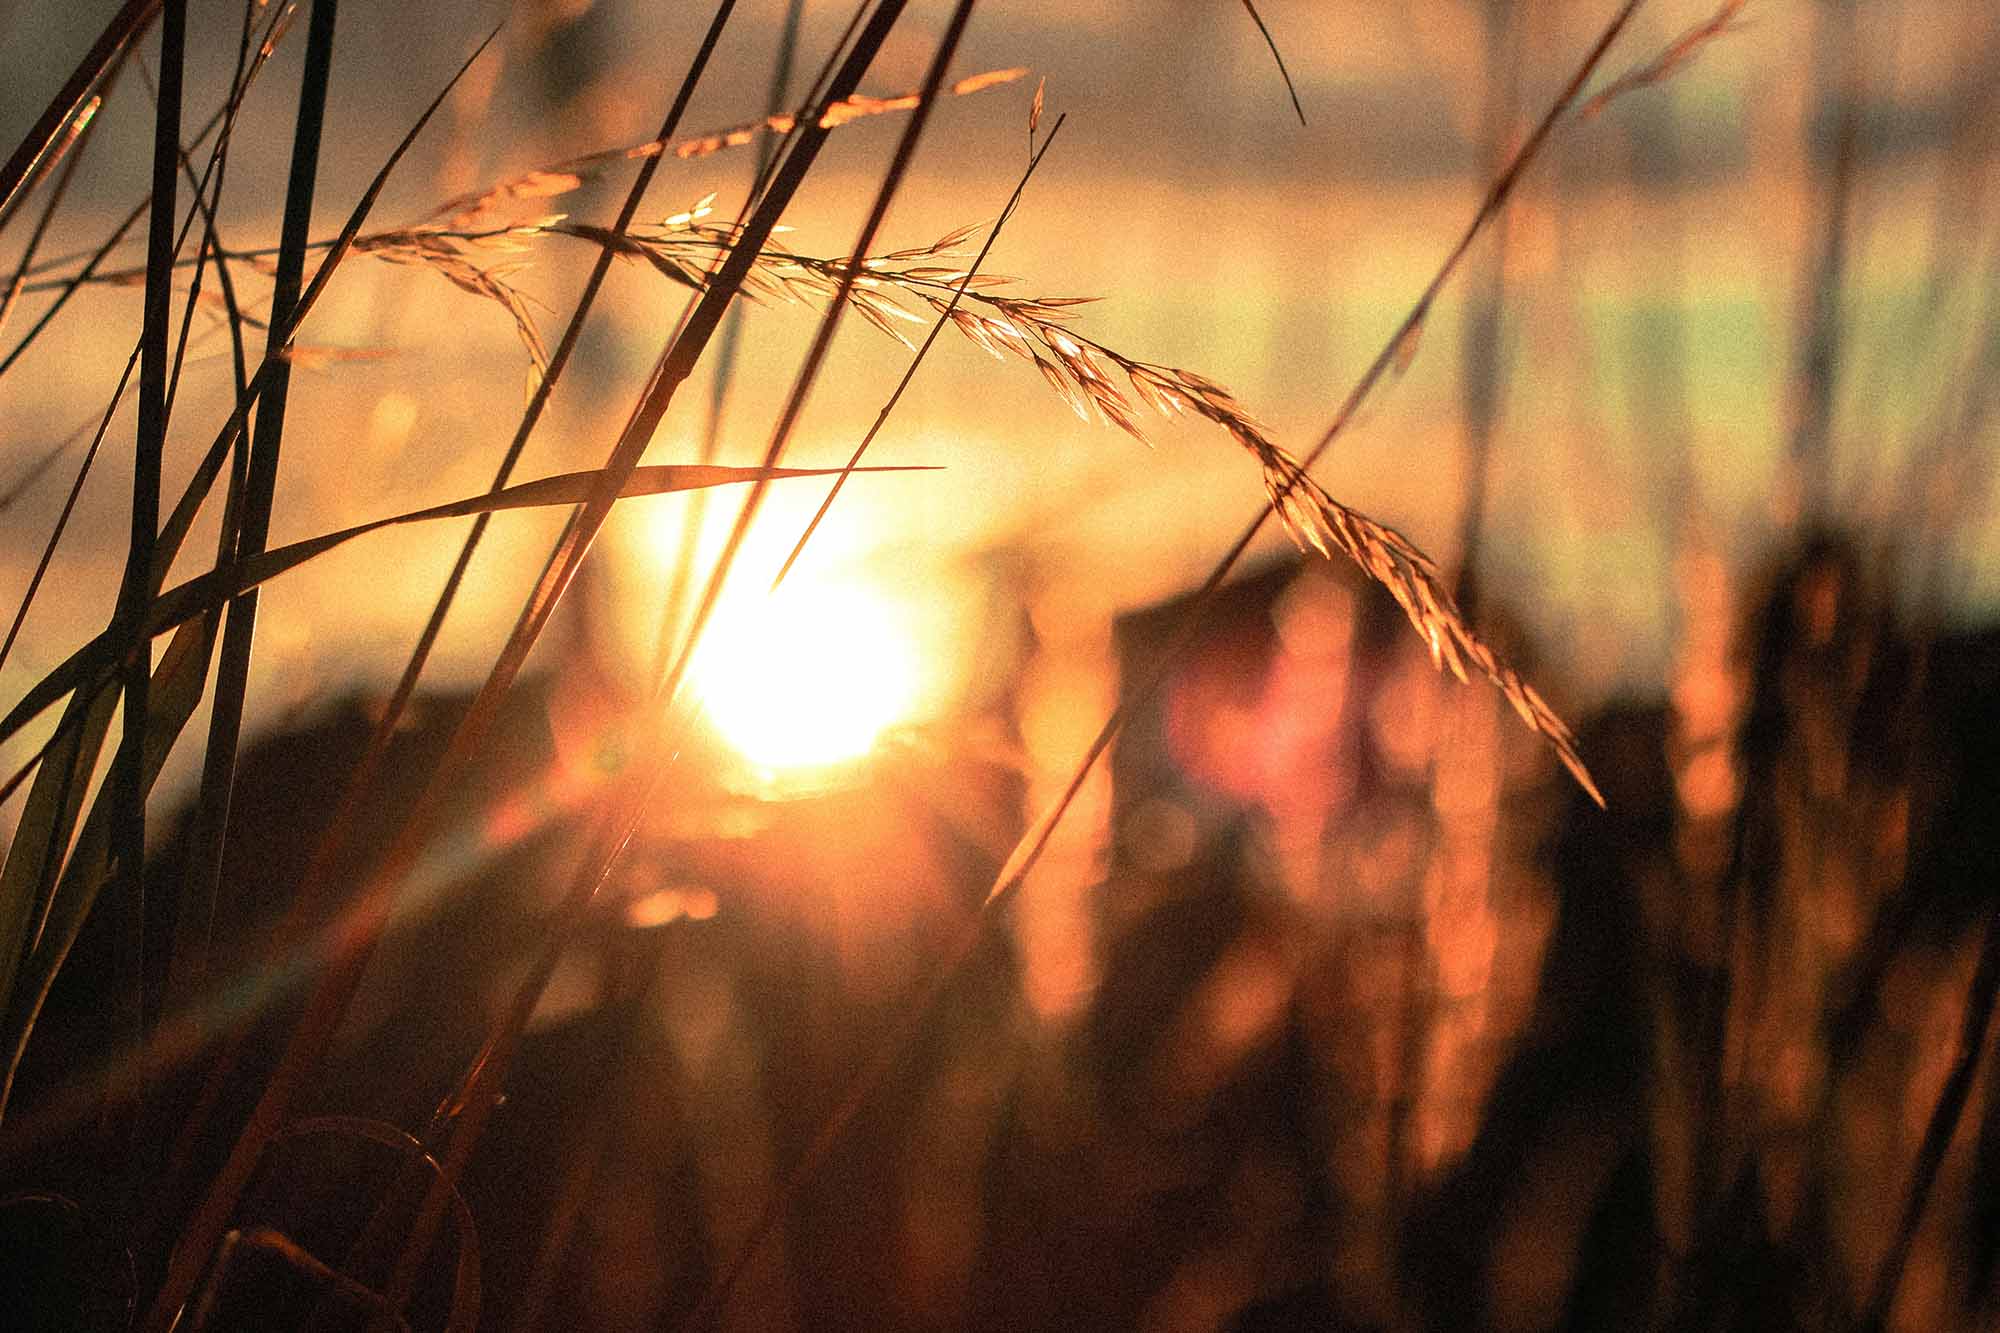 The sun sets over a field of wheat.